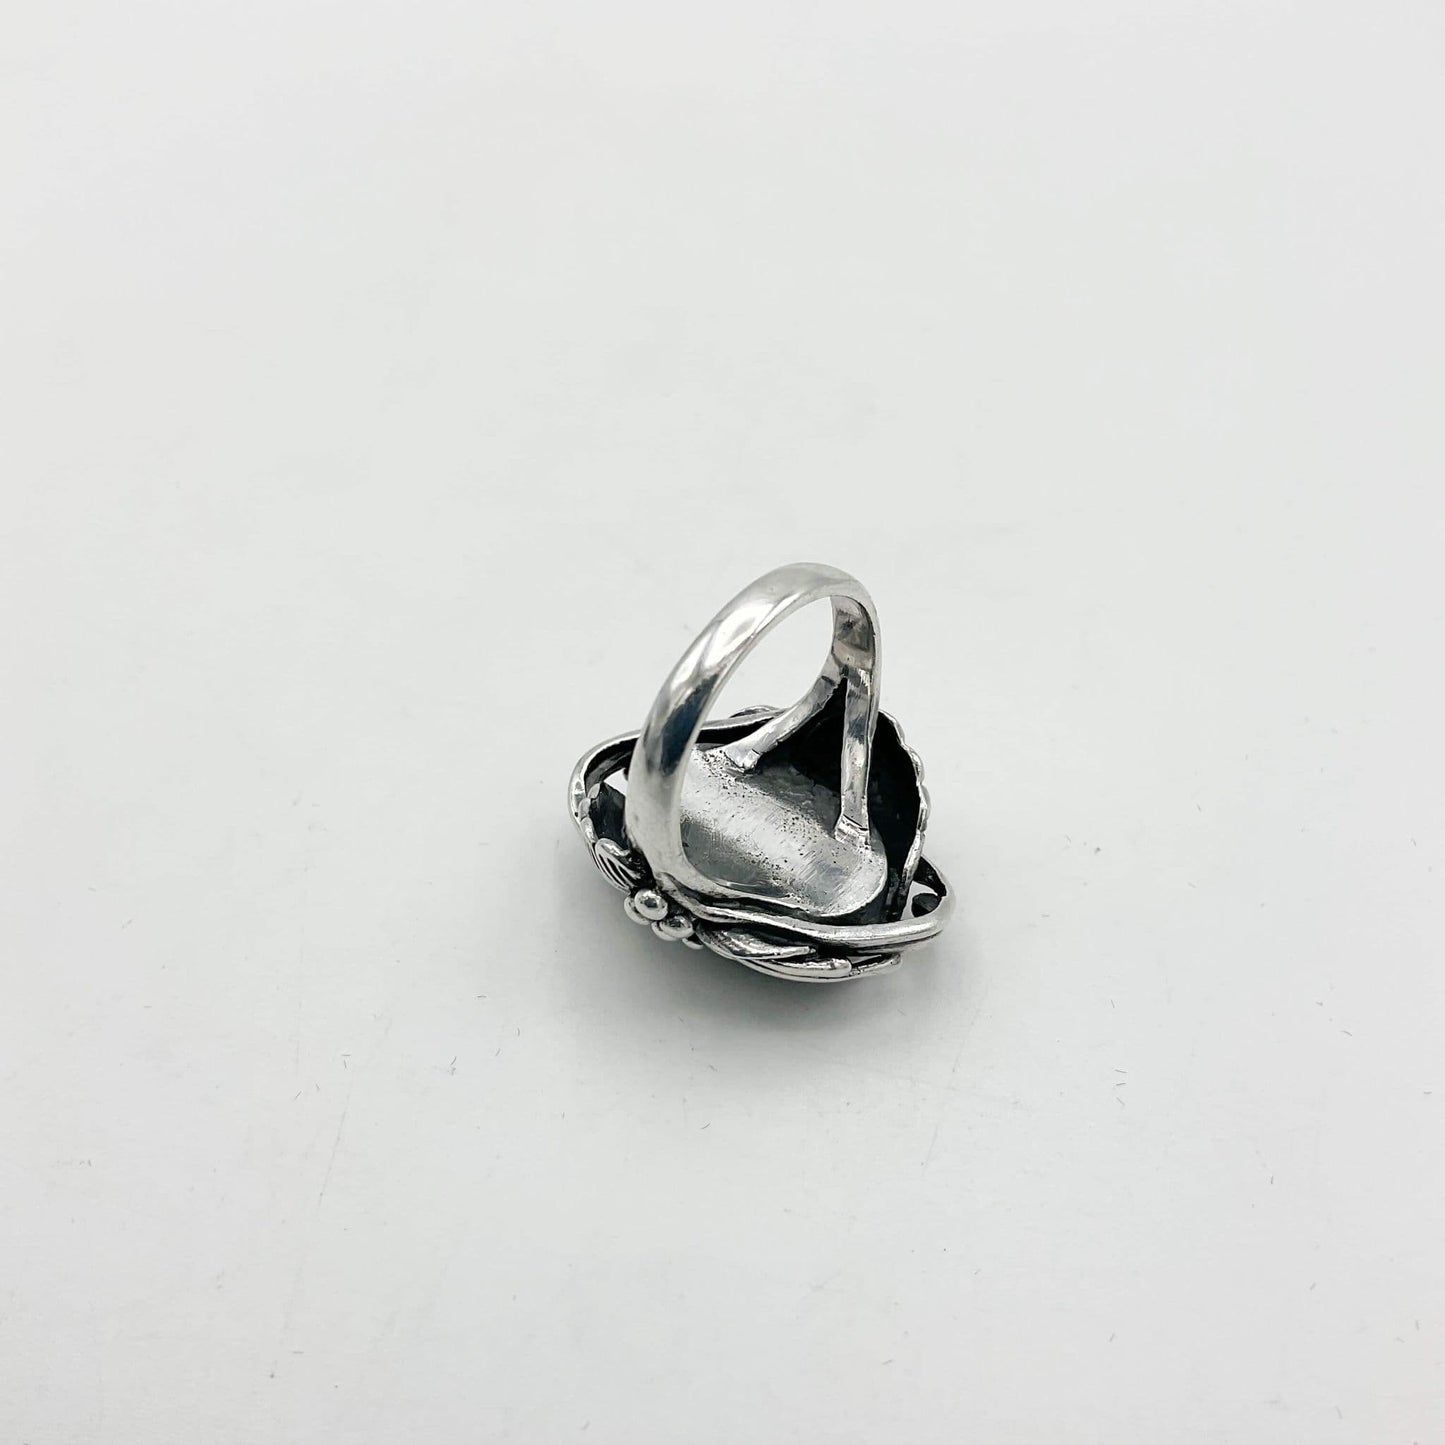 Silver ring upside down on white background showing silver band